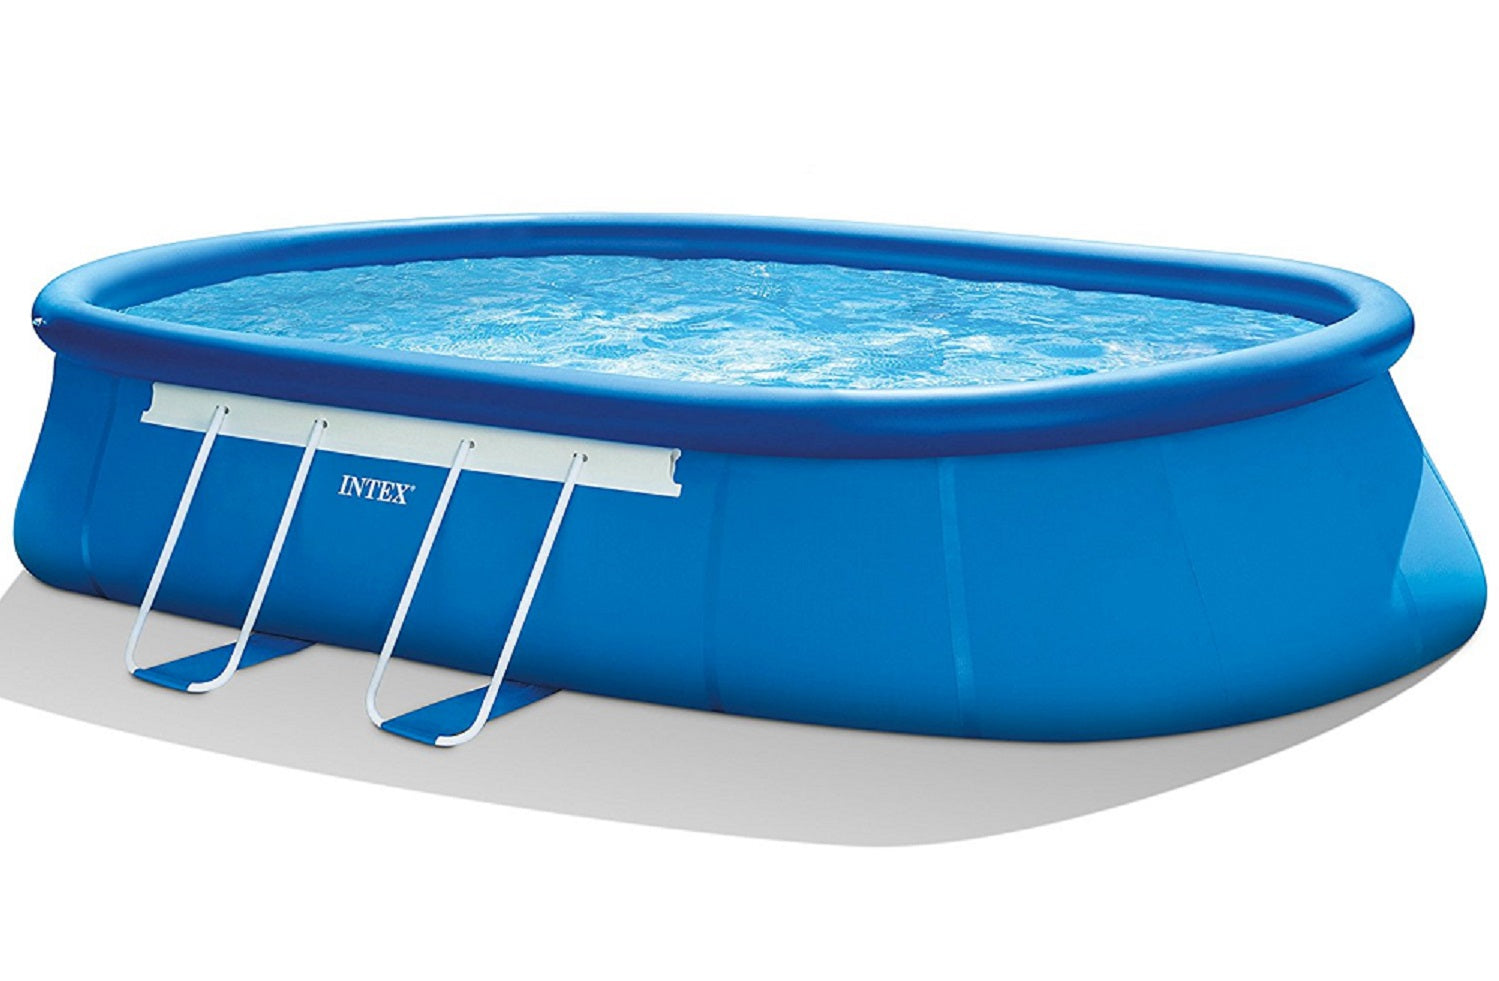 Intex 20ft X 12ft X 48in Oval Frame Pool Set with Filter Pump, Ladder, Ground Cloth & Pool Cover